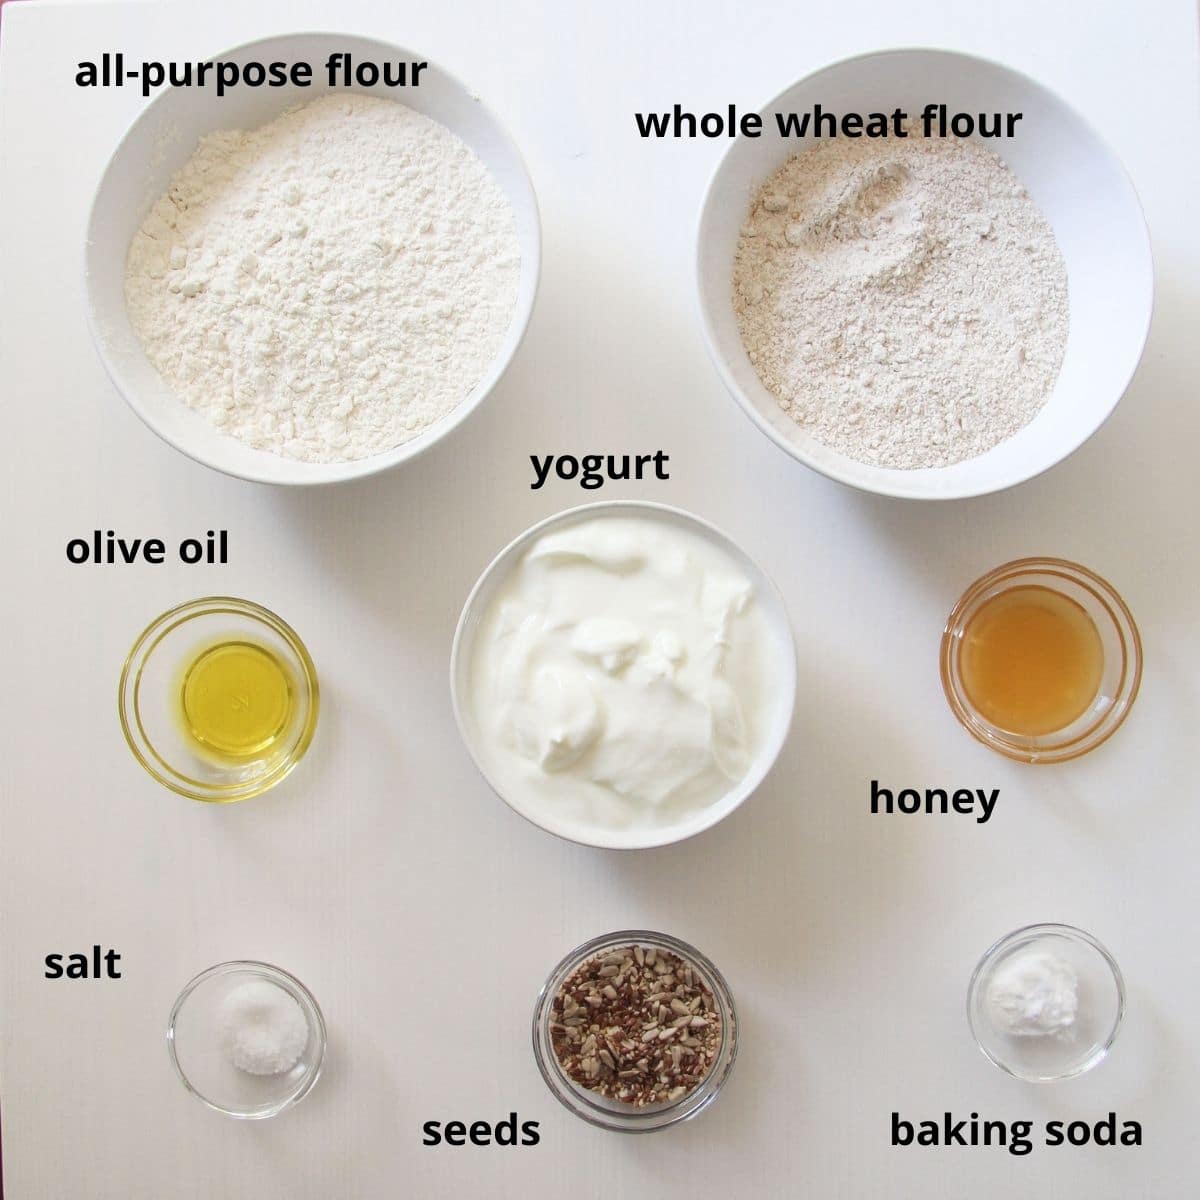 listed ingredients for making yogurt bread on the table.